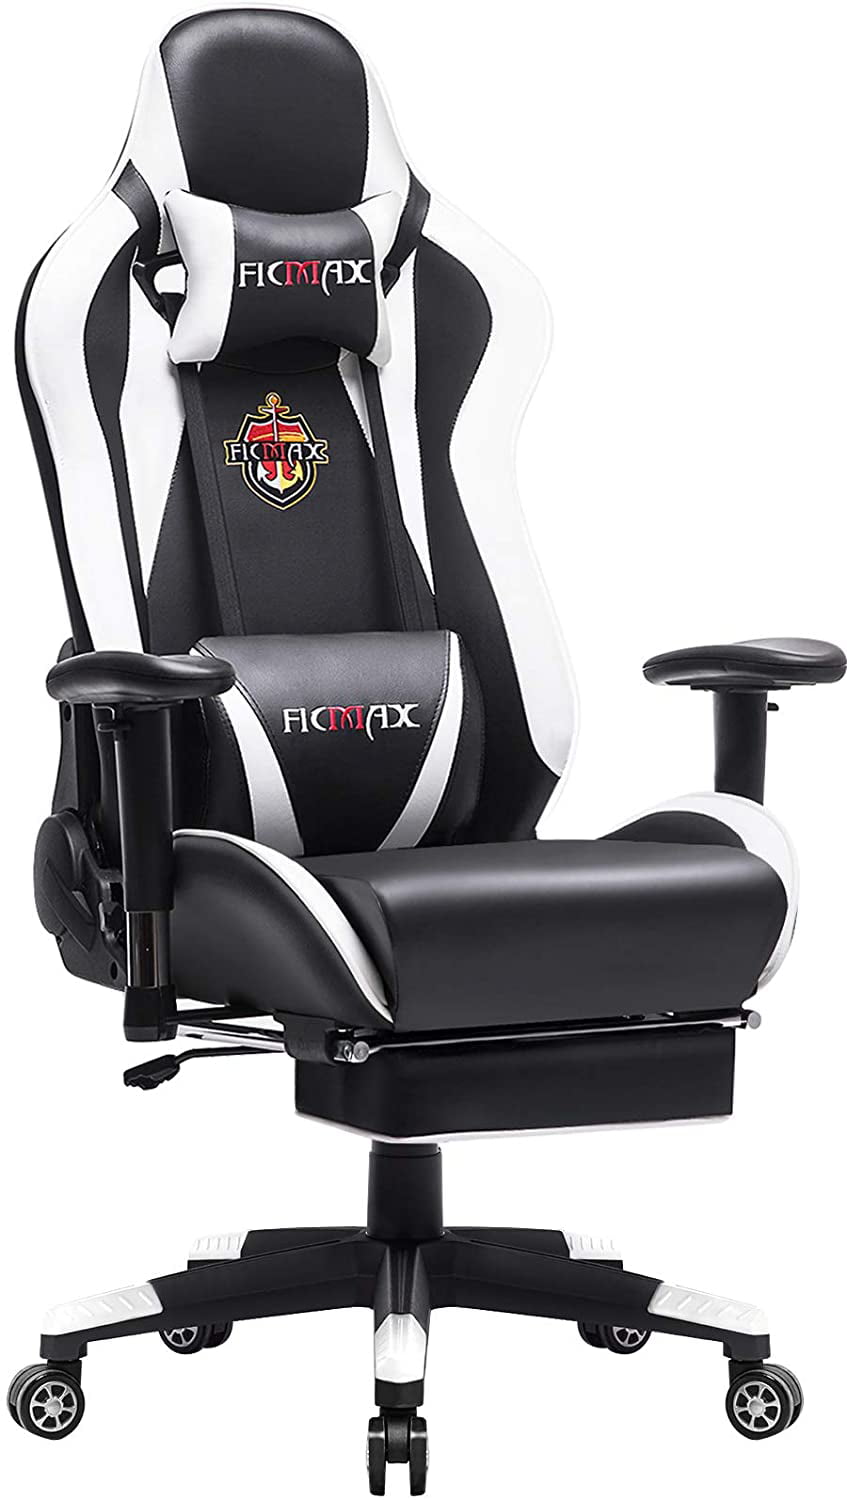 Details about   SWIVEL GAMING RACING CHAIR COMPUTER DESK OFFICE EXECUTIVE PU LEATHER ARMCHAIR 